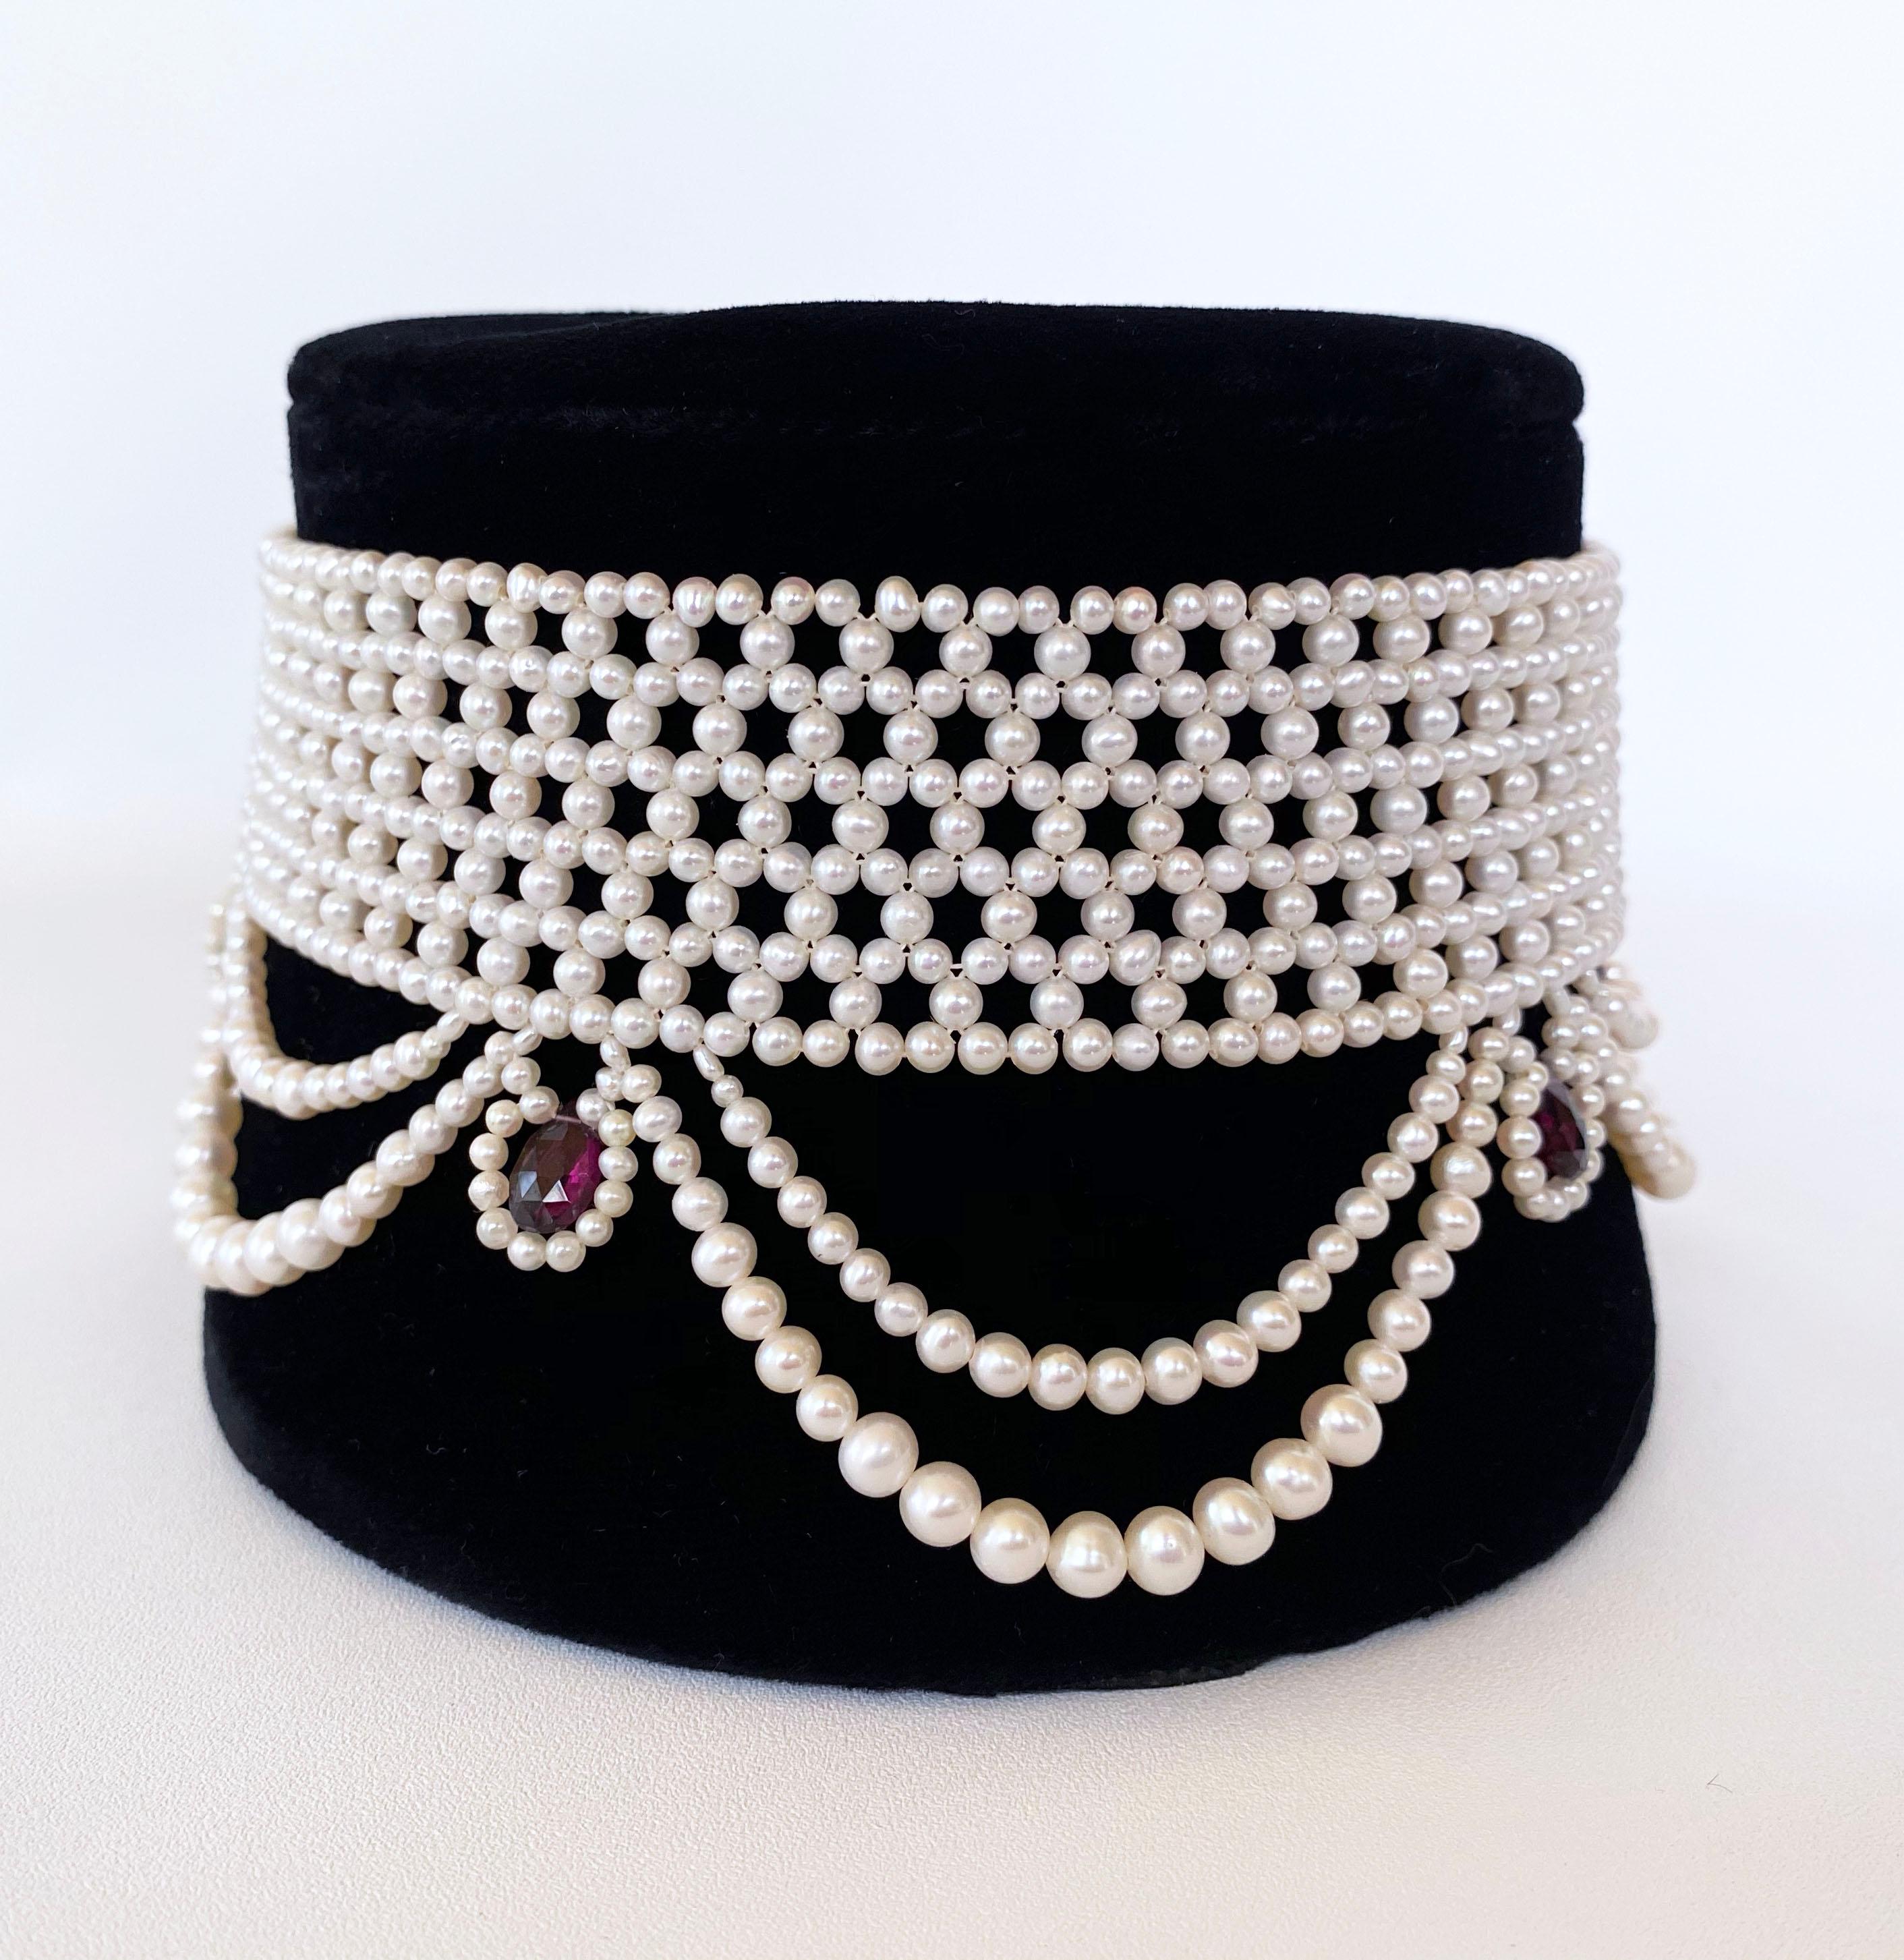 Marina J Woven Pearl Choker with Pearl Drapes, Garnet Briolettes and 14 K Gold 1